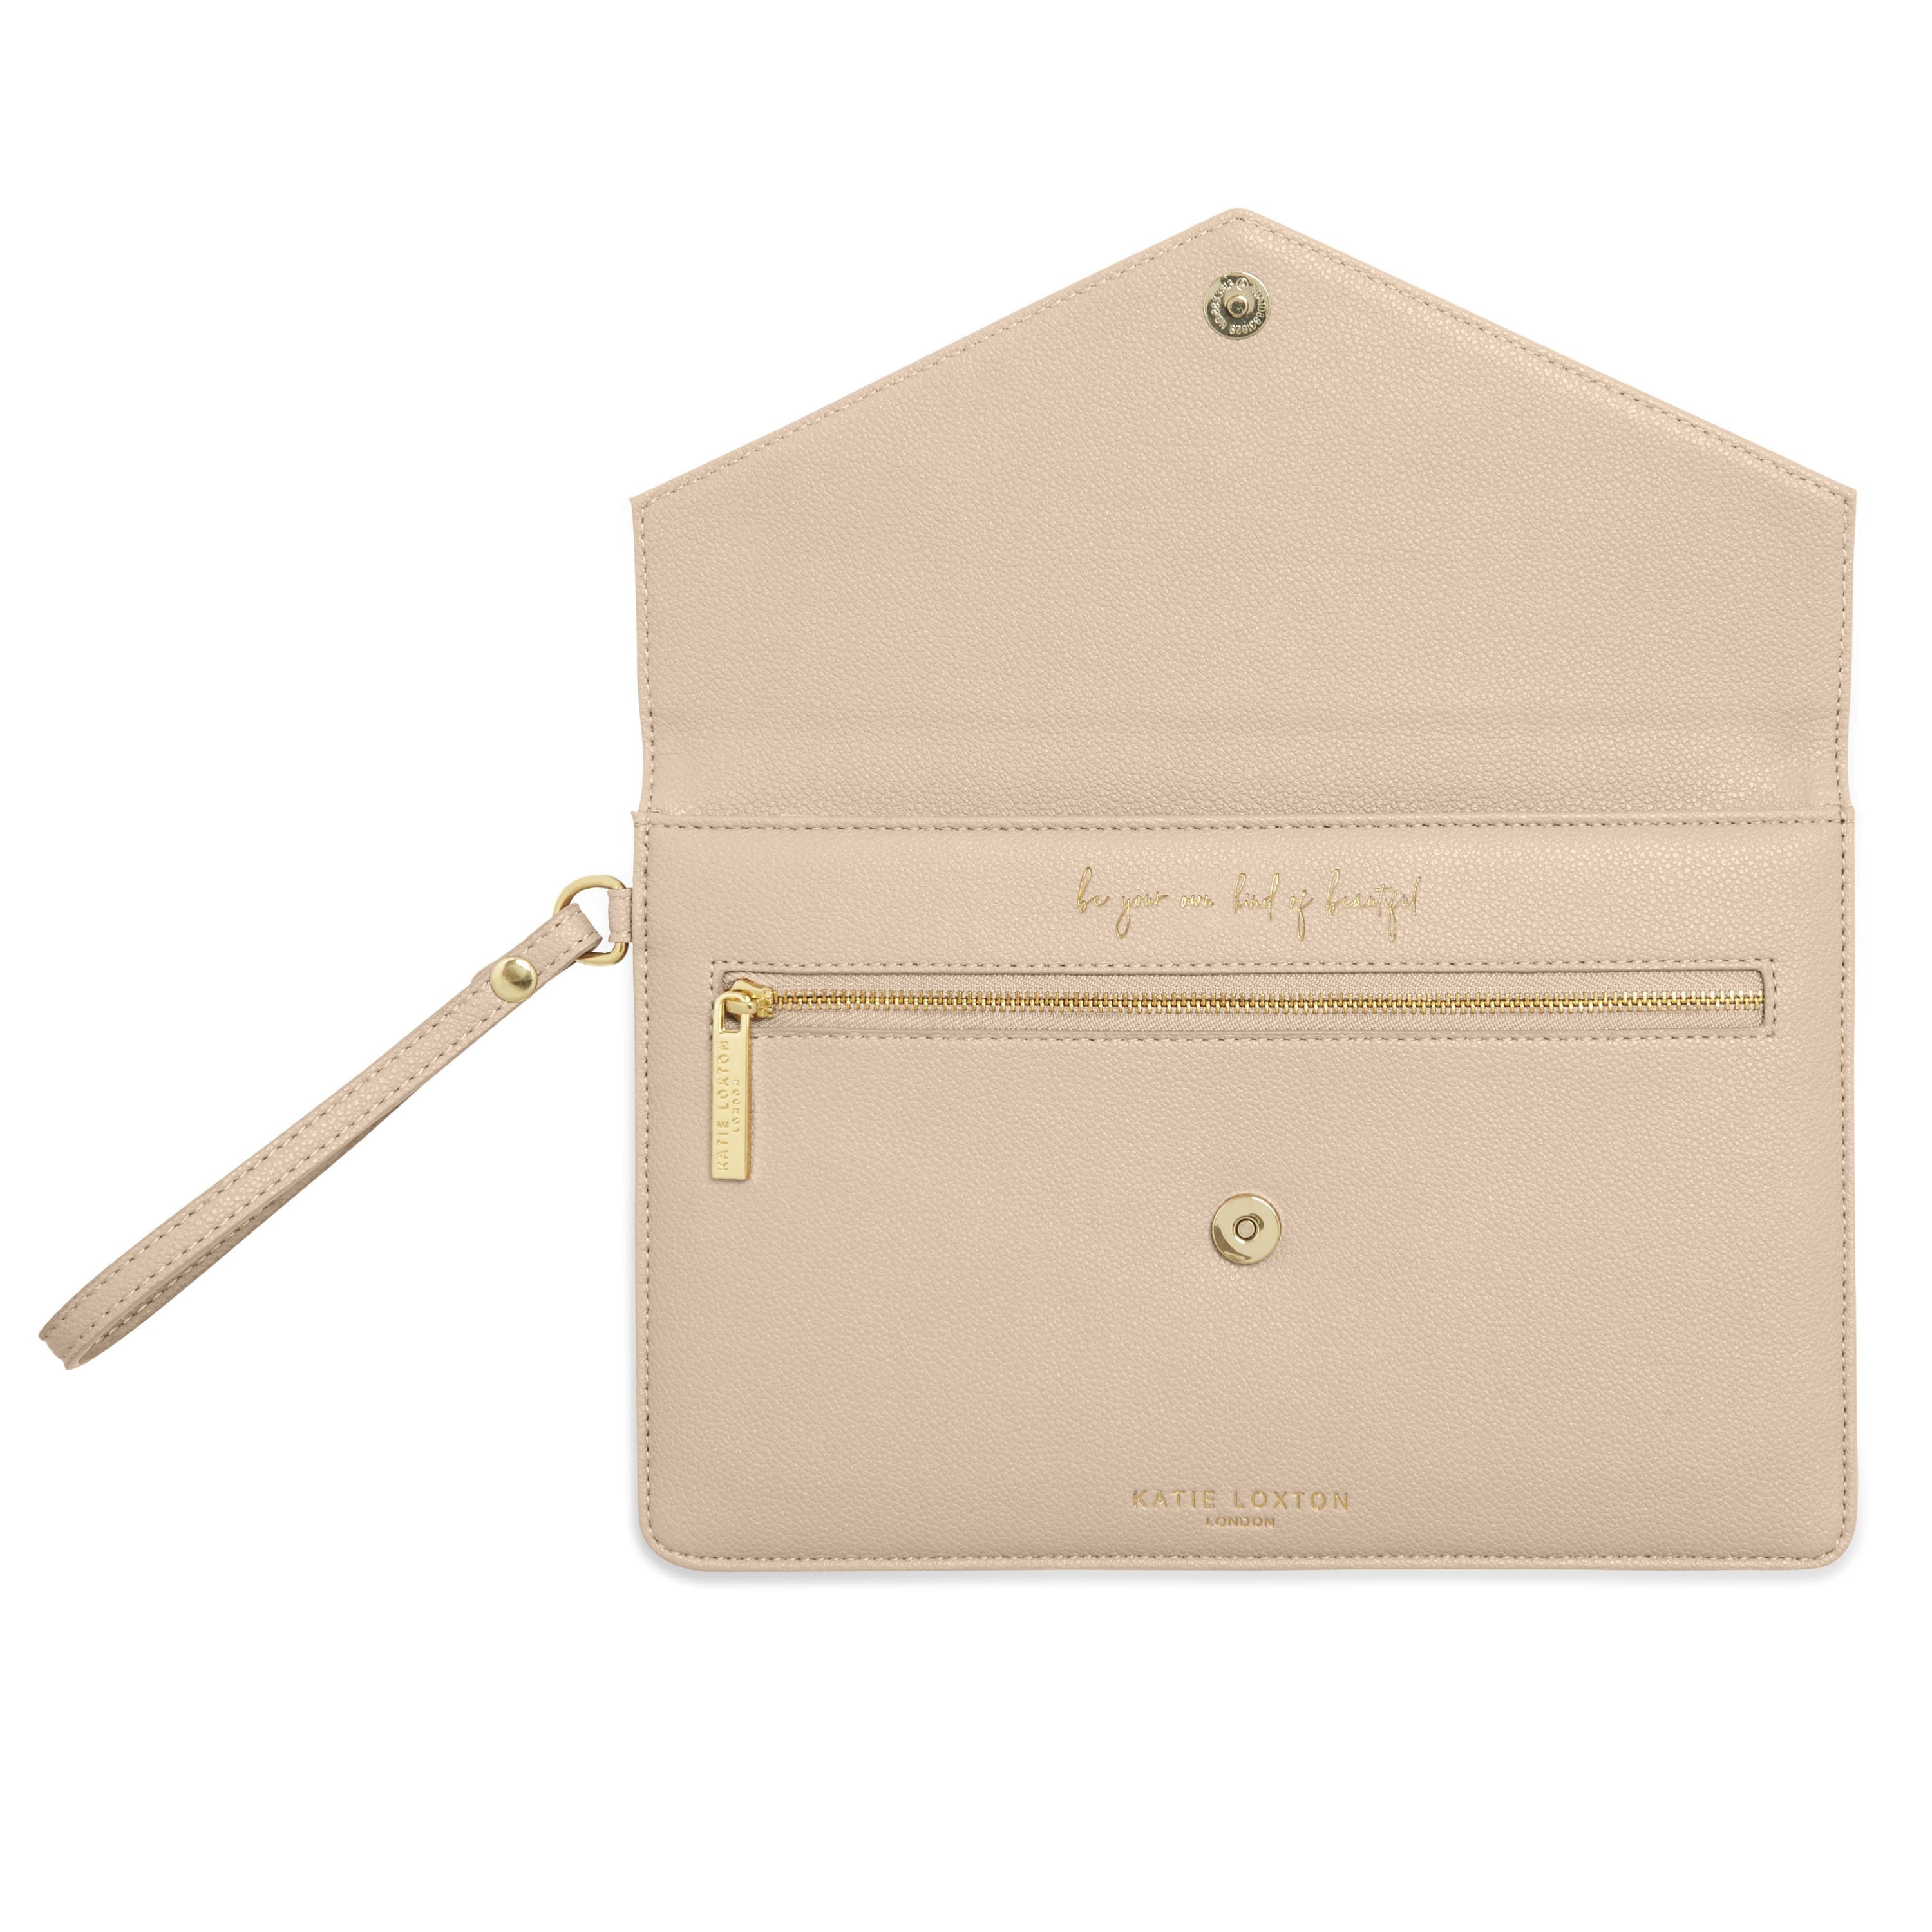 Katie Loxton Gifts One Size Katie Loxton Esme Envelope Nude Pink Clutch Bag KLB797 izzi-of-baslow